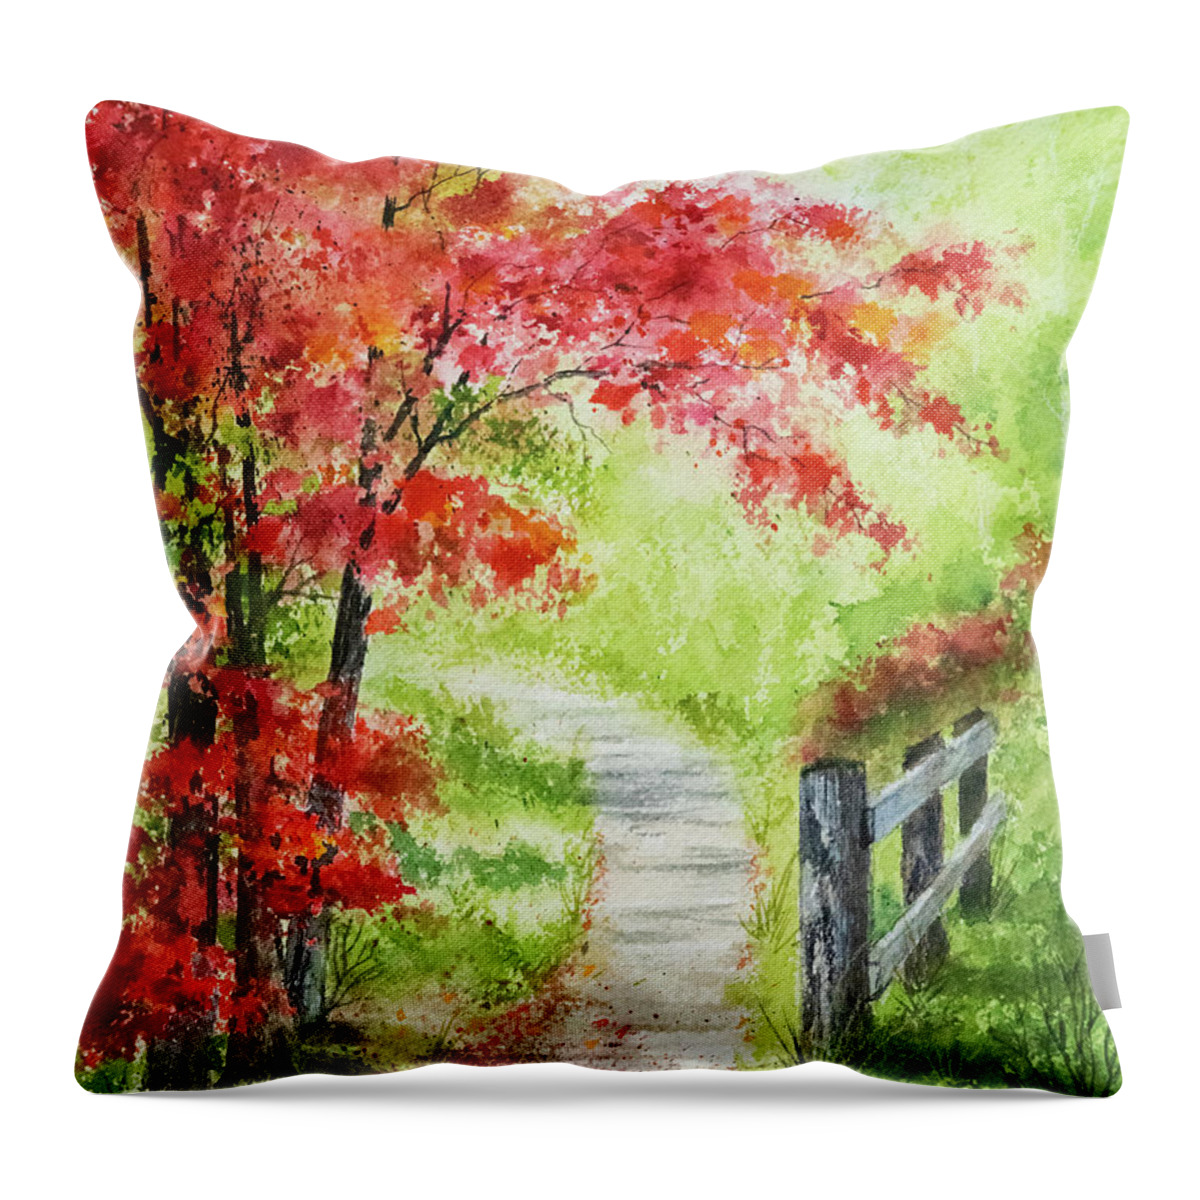 Nature Throw Pillow featuring the painting Walk This Way by Linda Shannon Morgan